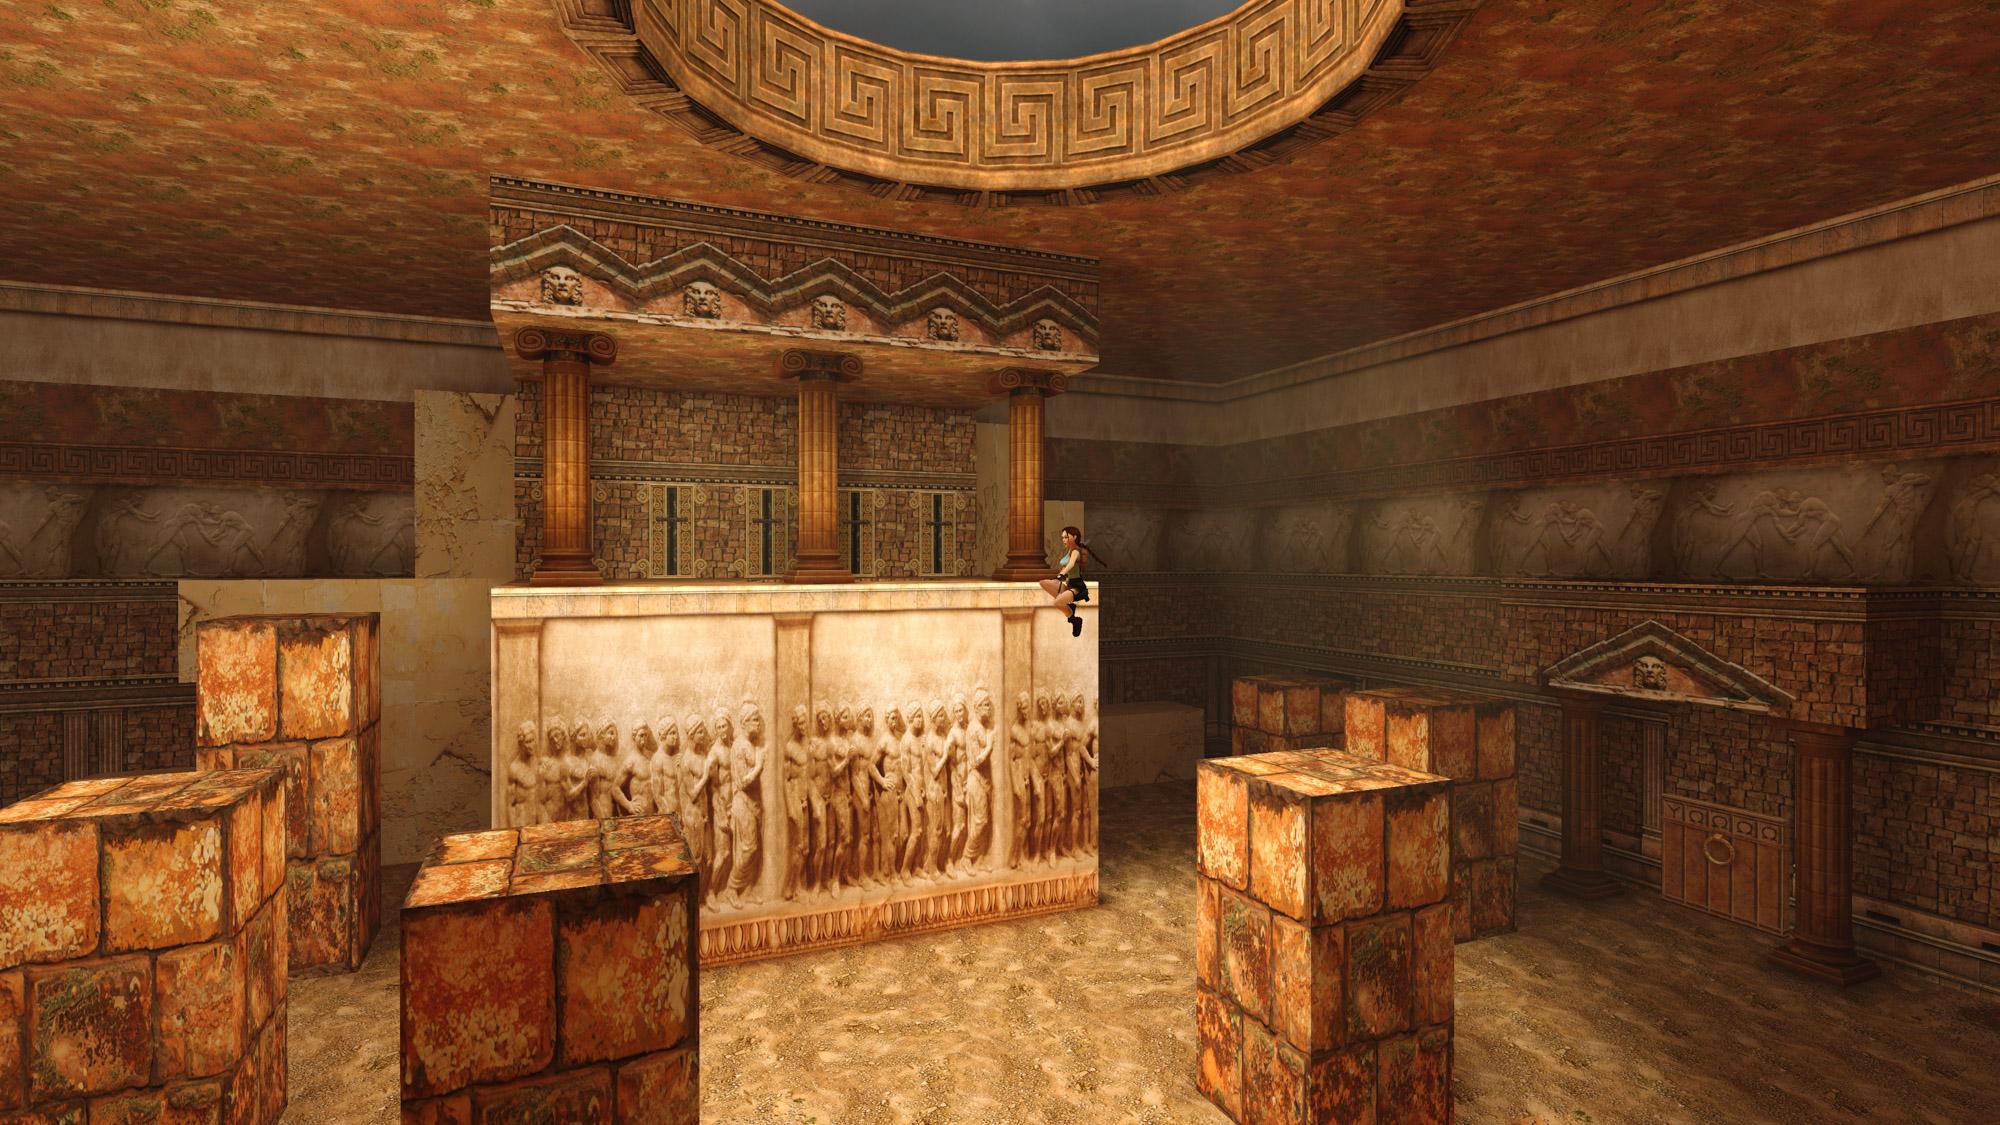 Lara jumping from a square pillar in Palace Midas in the room with Greek letters (omegas and upsilons) and five levers.